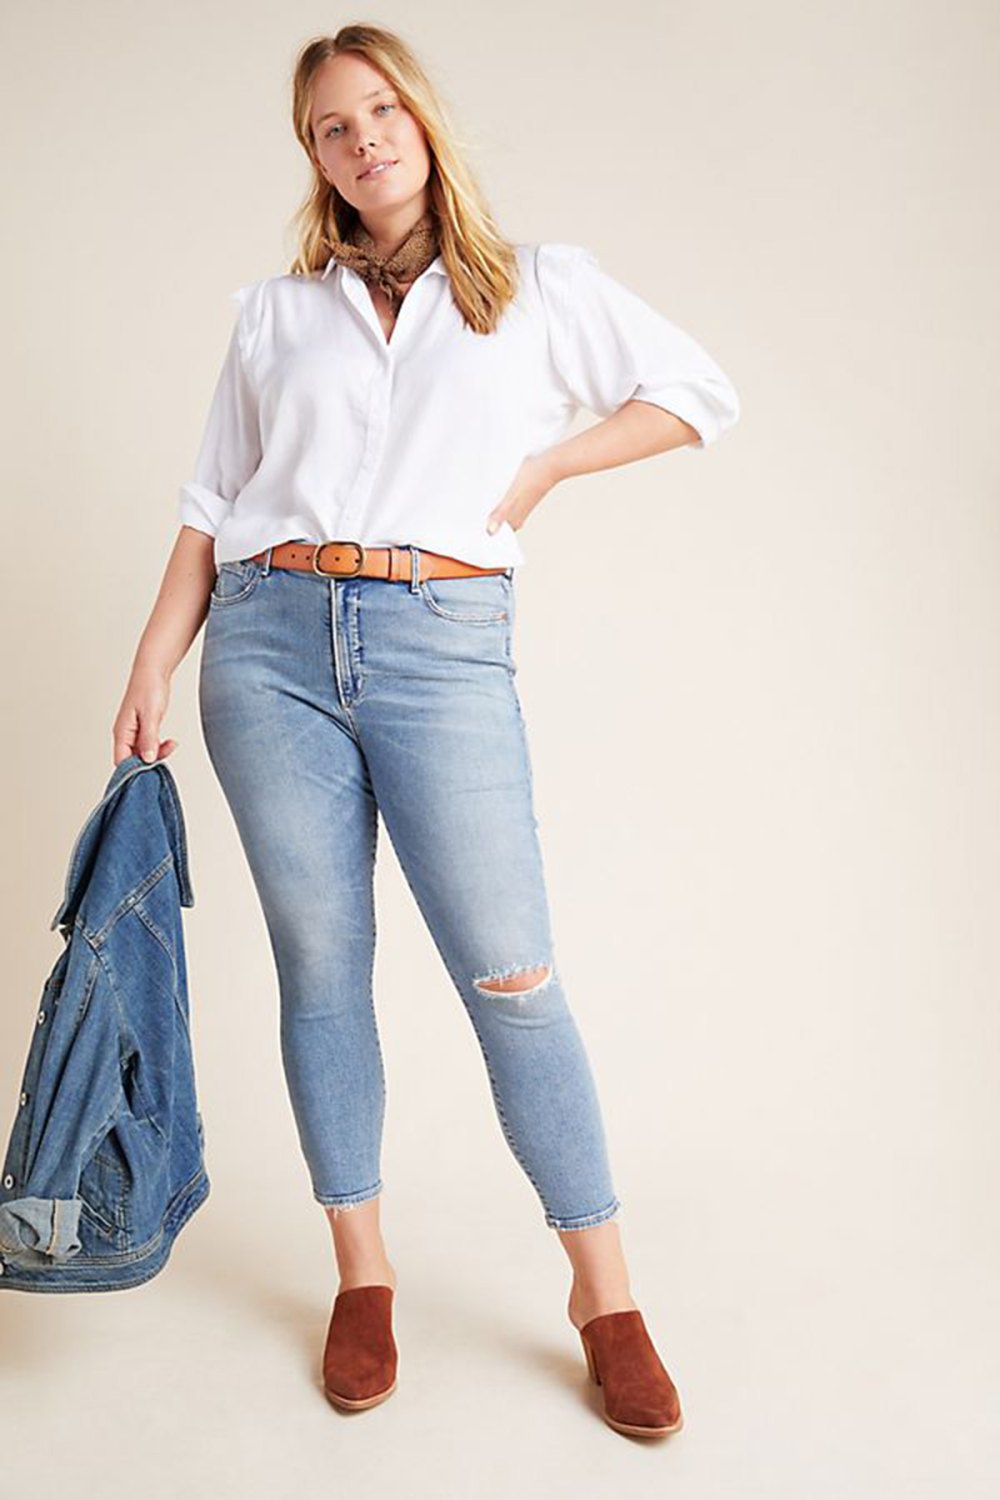 Anthropologie Top Is the New Way to Master Business Casual | Us Weekly